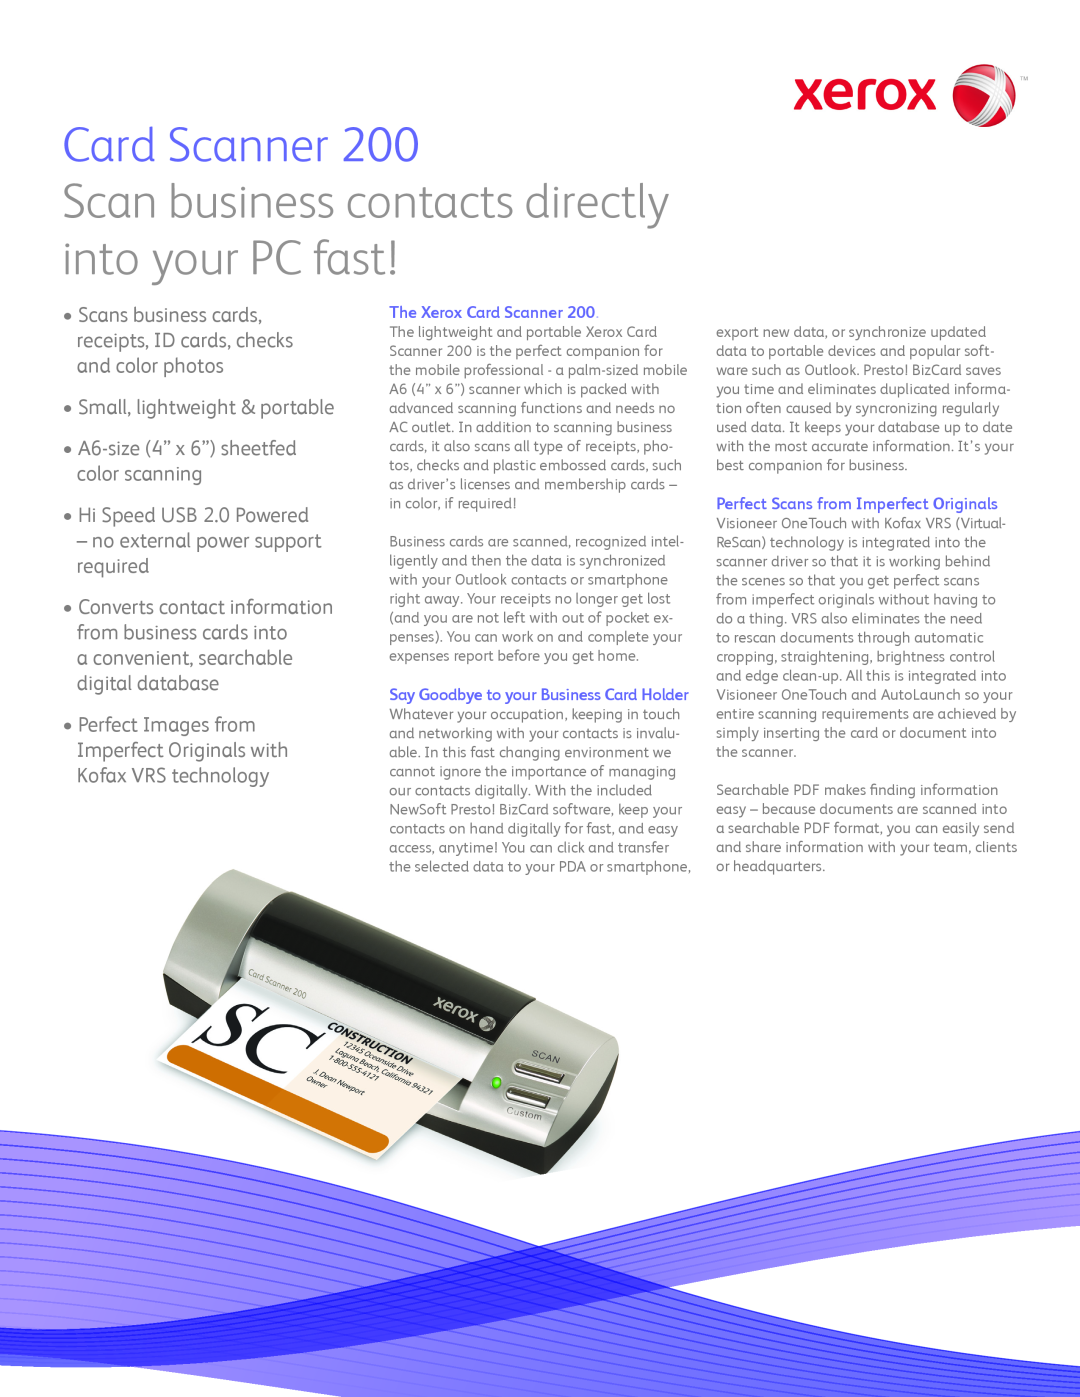 Xerox 200 manual Say Goodbye to your Business Card Holder, Card Scanner, Scan business contacts directly into your PC fast 